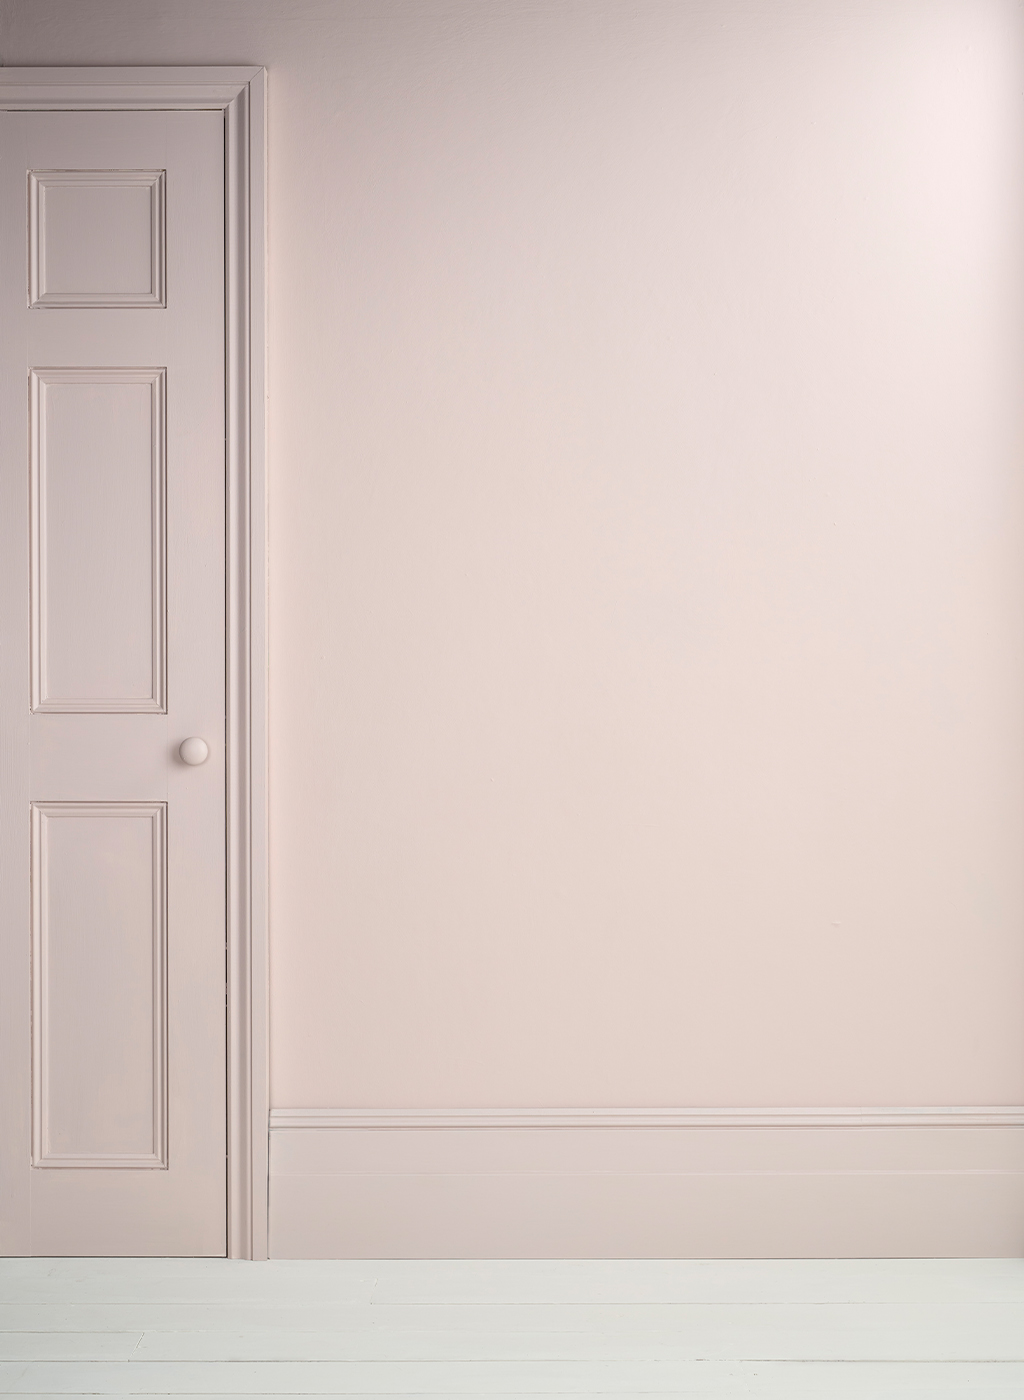 Lifestyle Image of Annie Sloan Satin Paint in Pointe Silk used on door and skirting